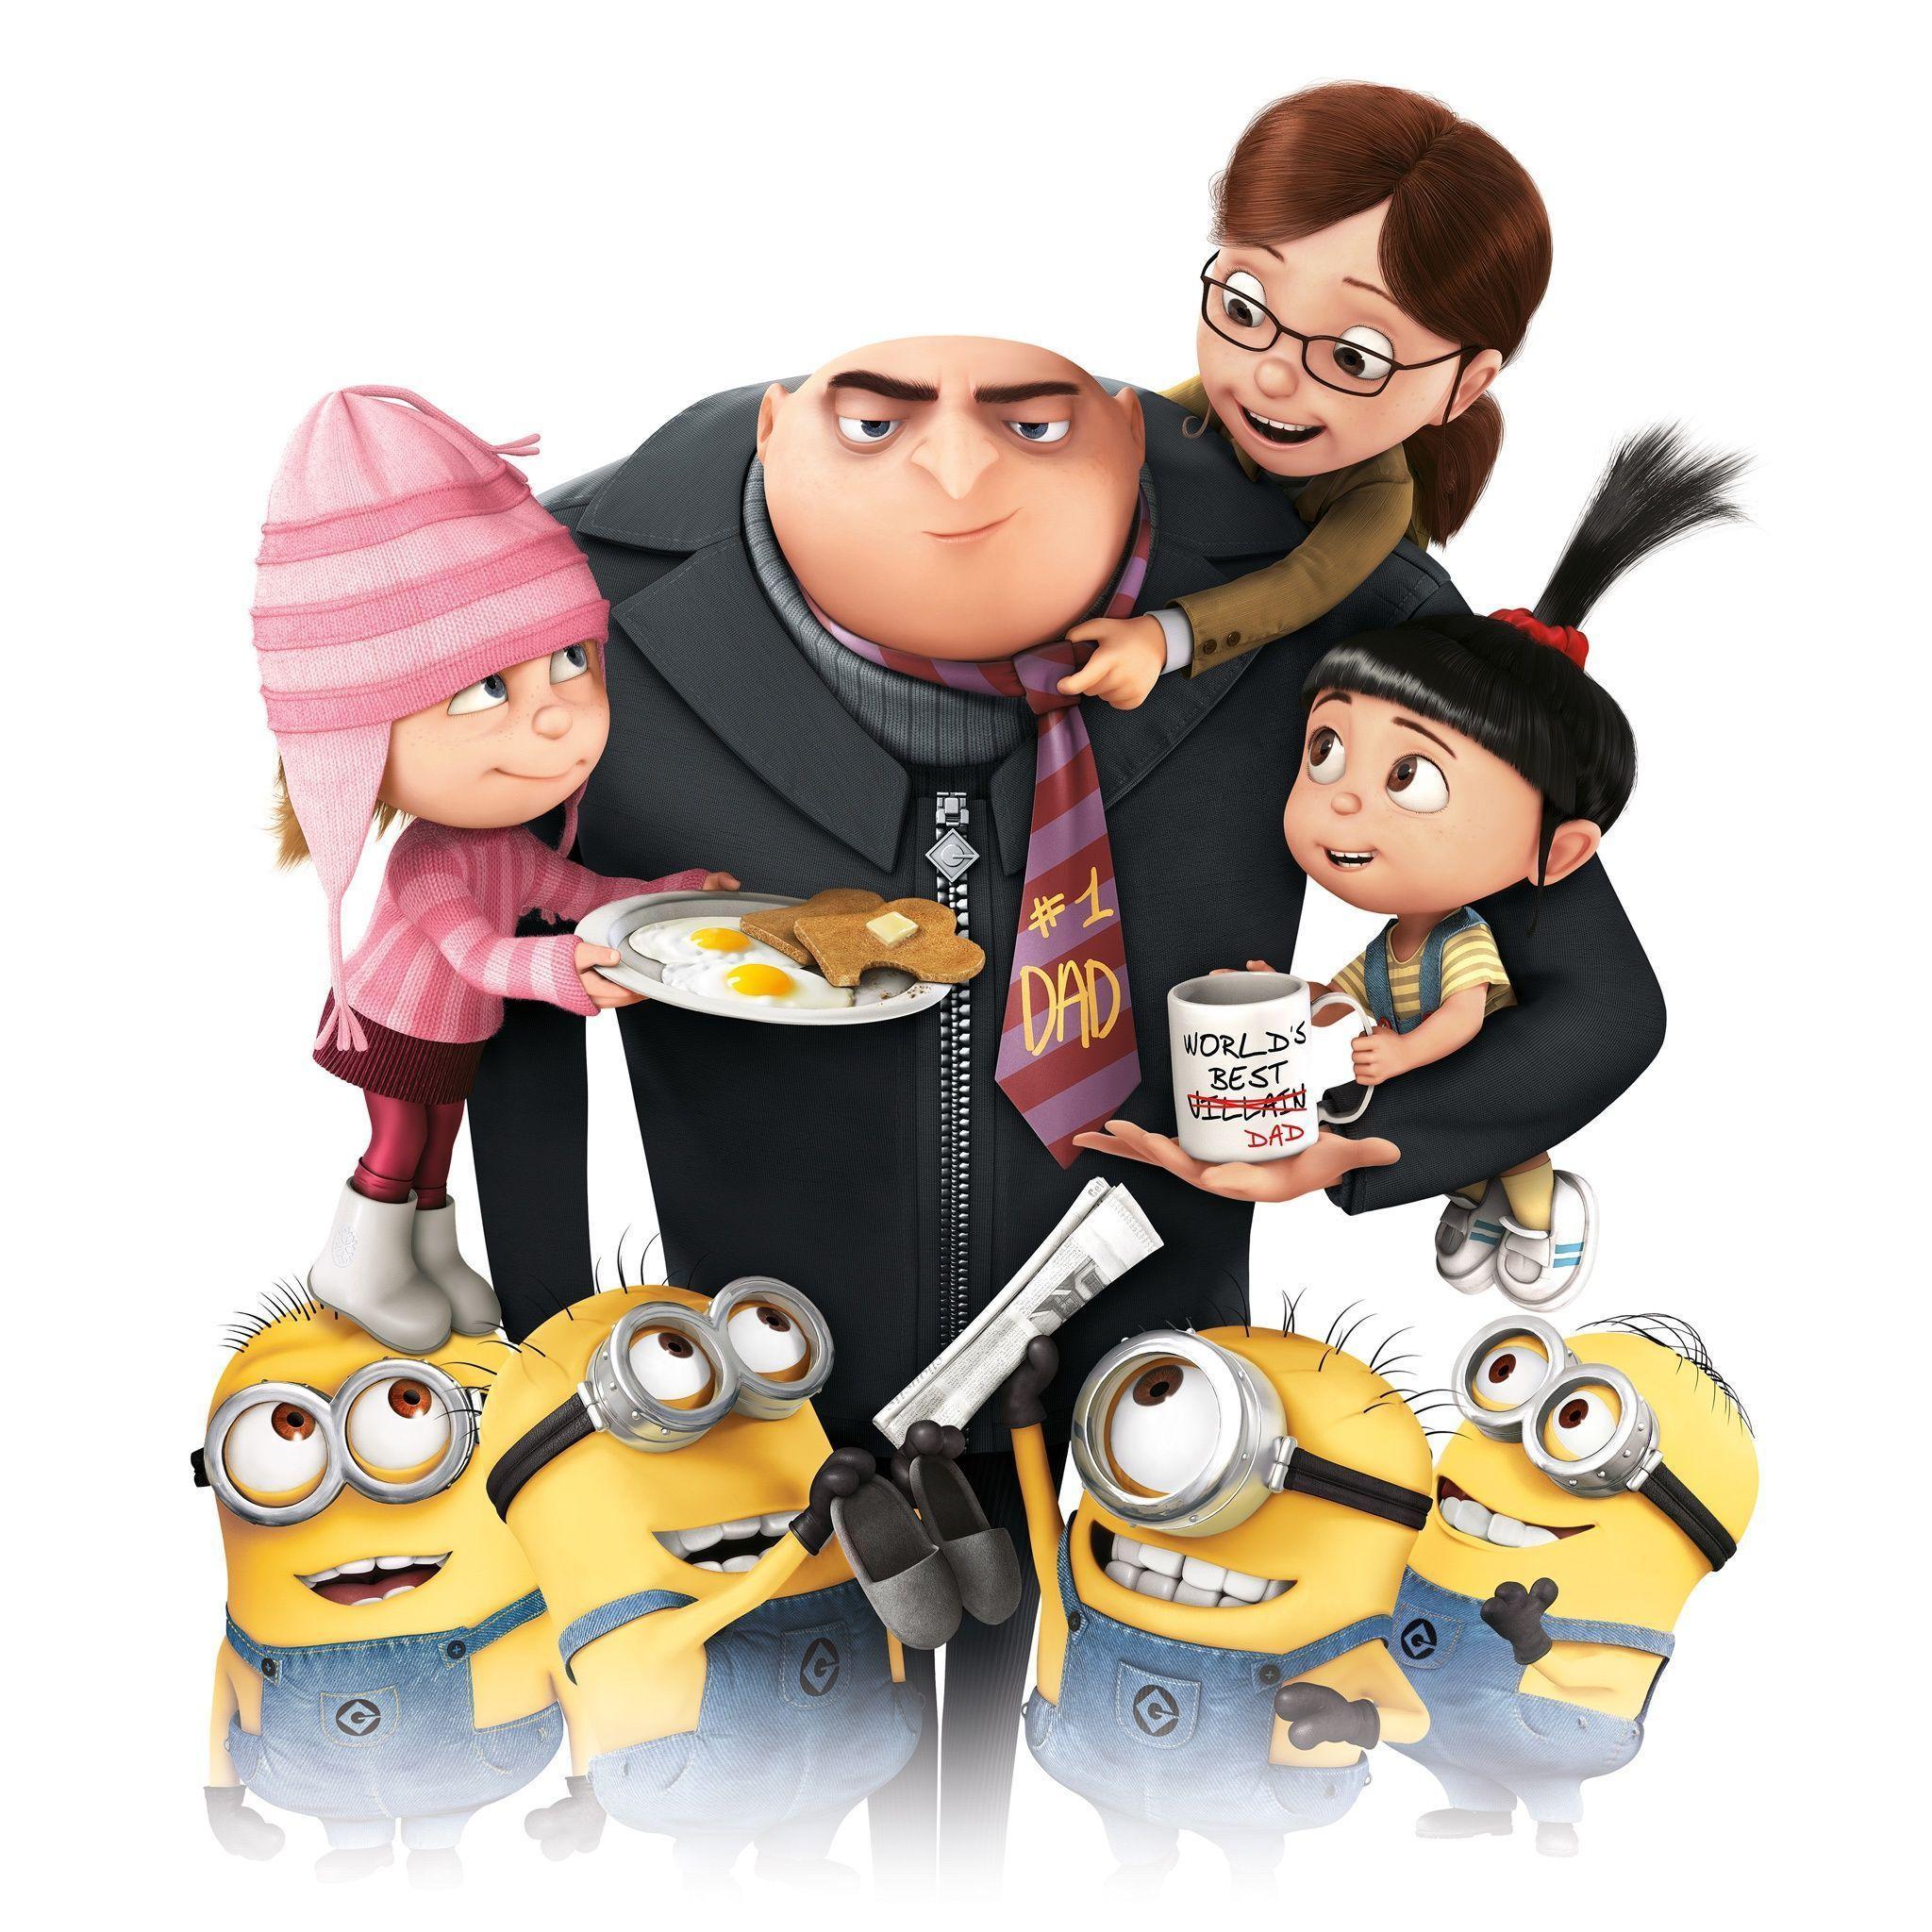 Despicable me 2 2013 Movie Wallpaper HD. Download High